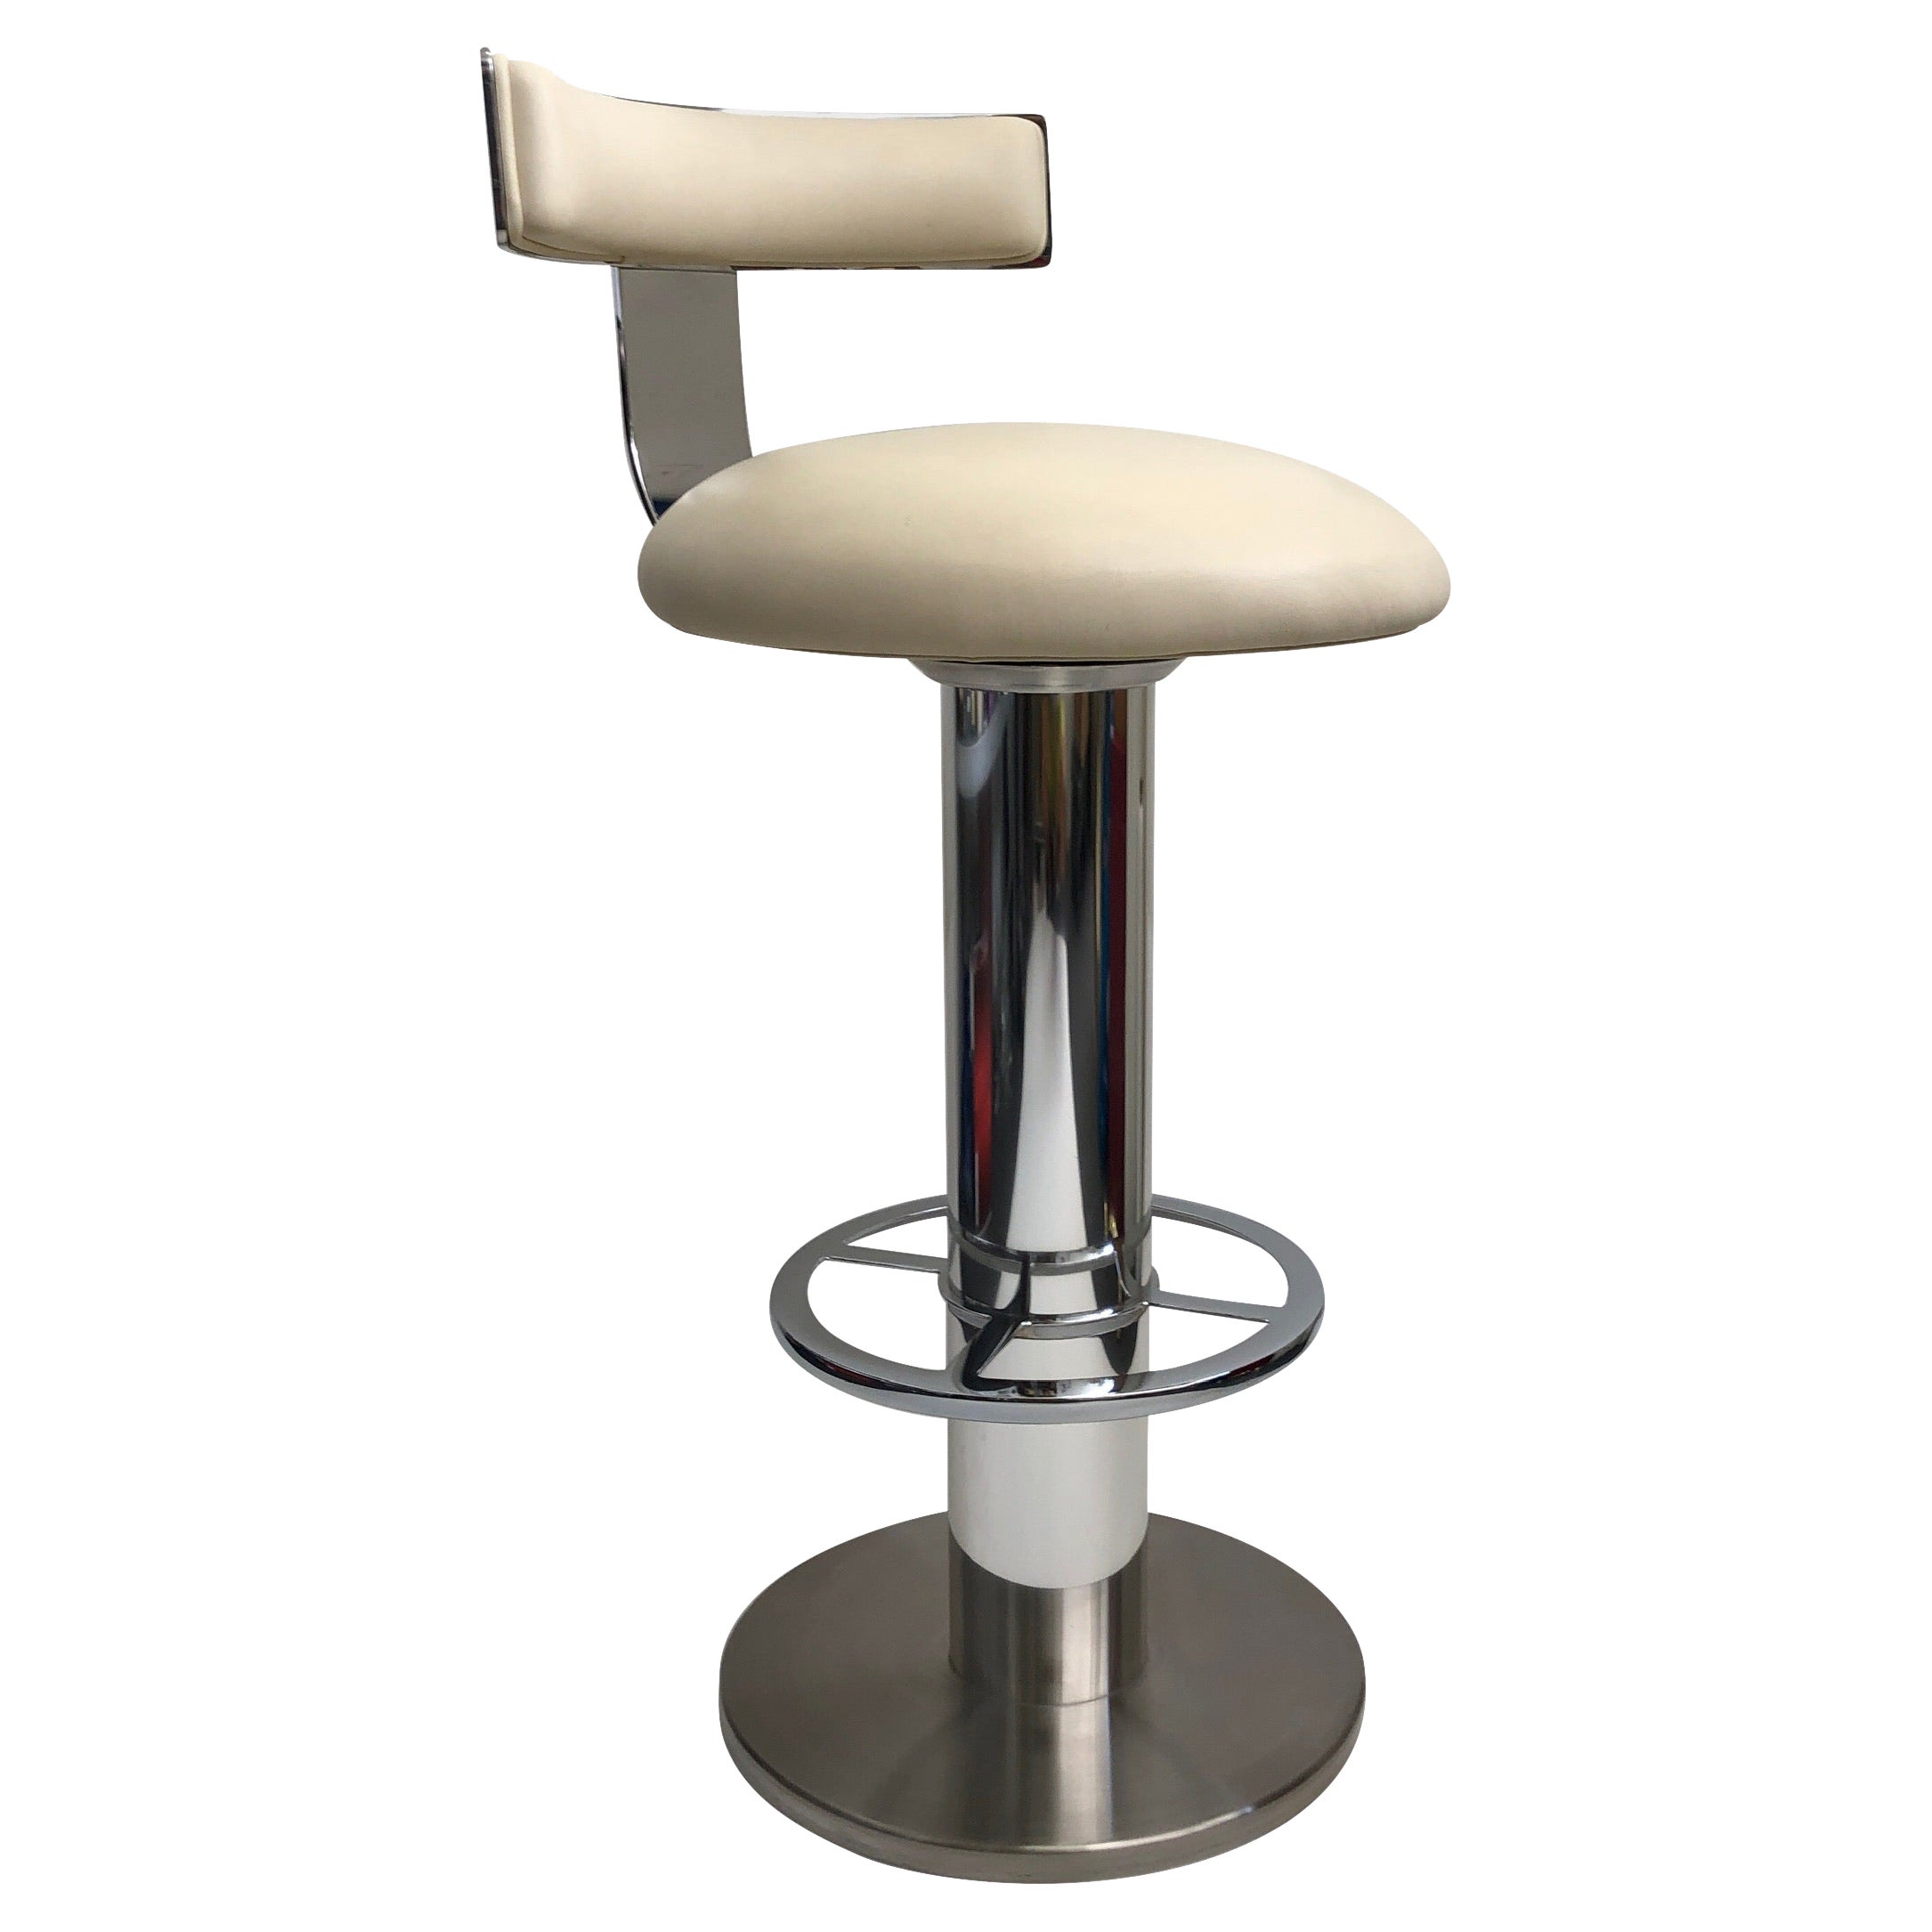 Polish Aluminum and Leather Swivel Barstool by Design For Leisure